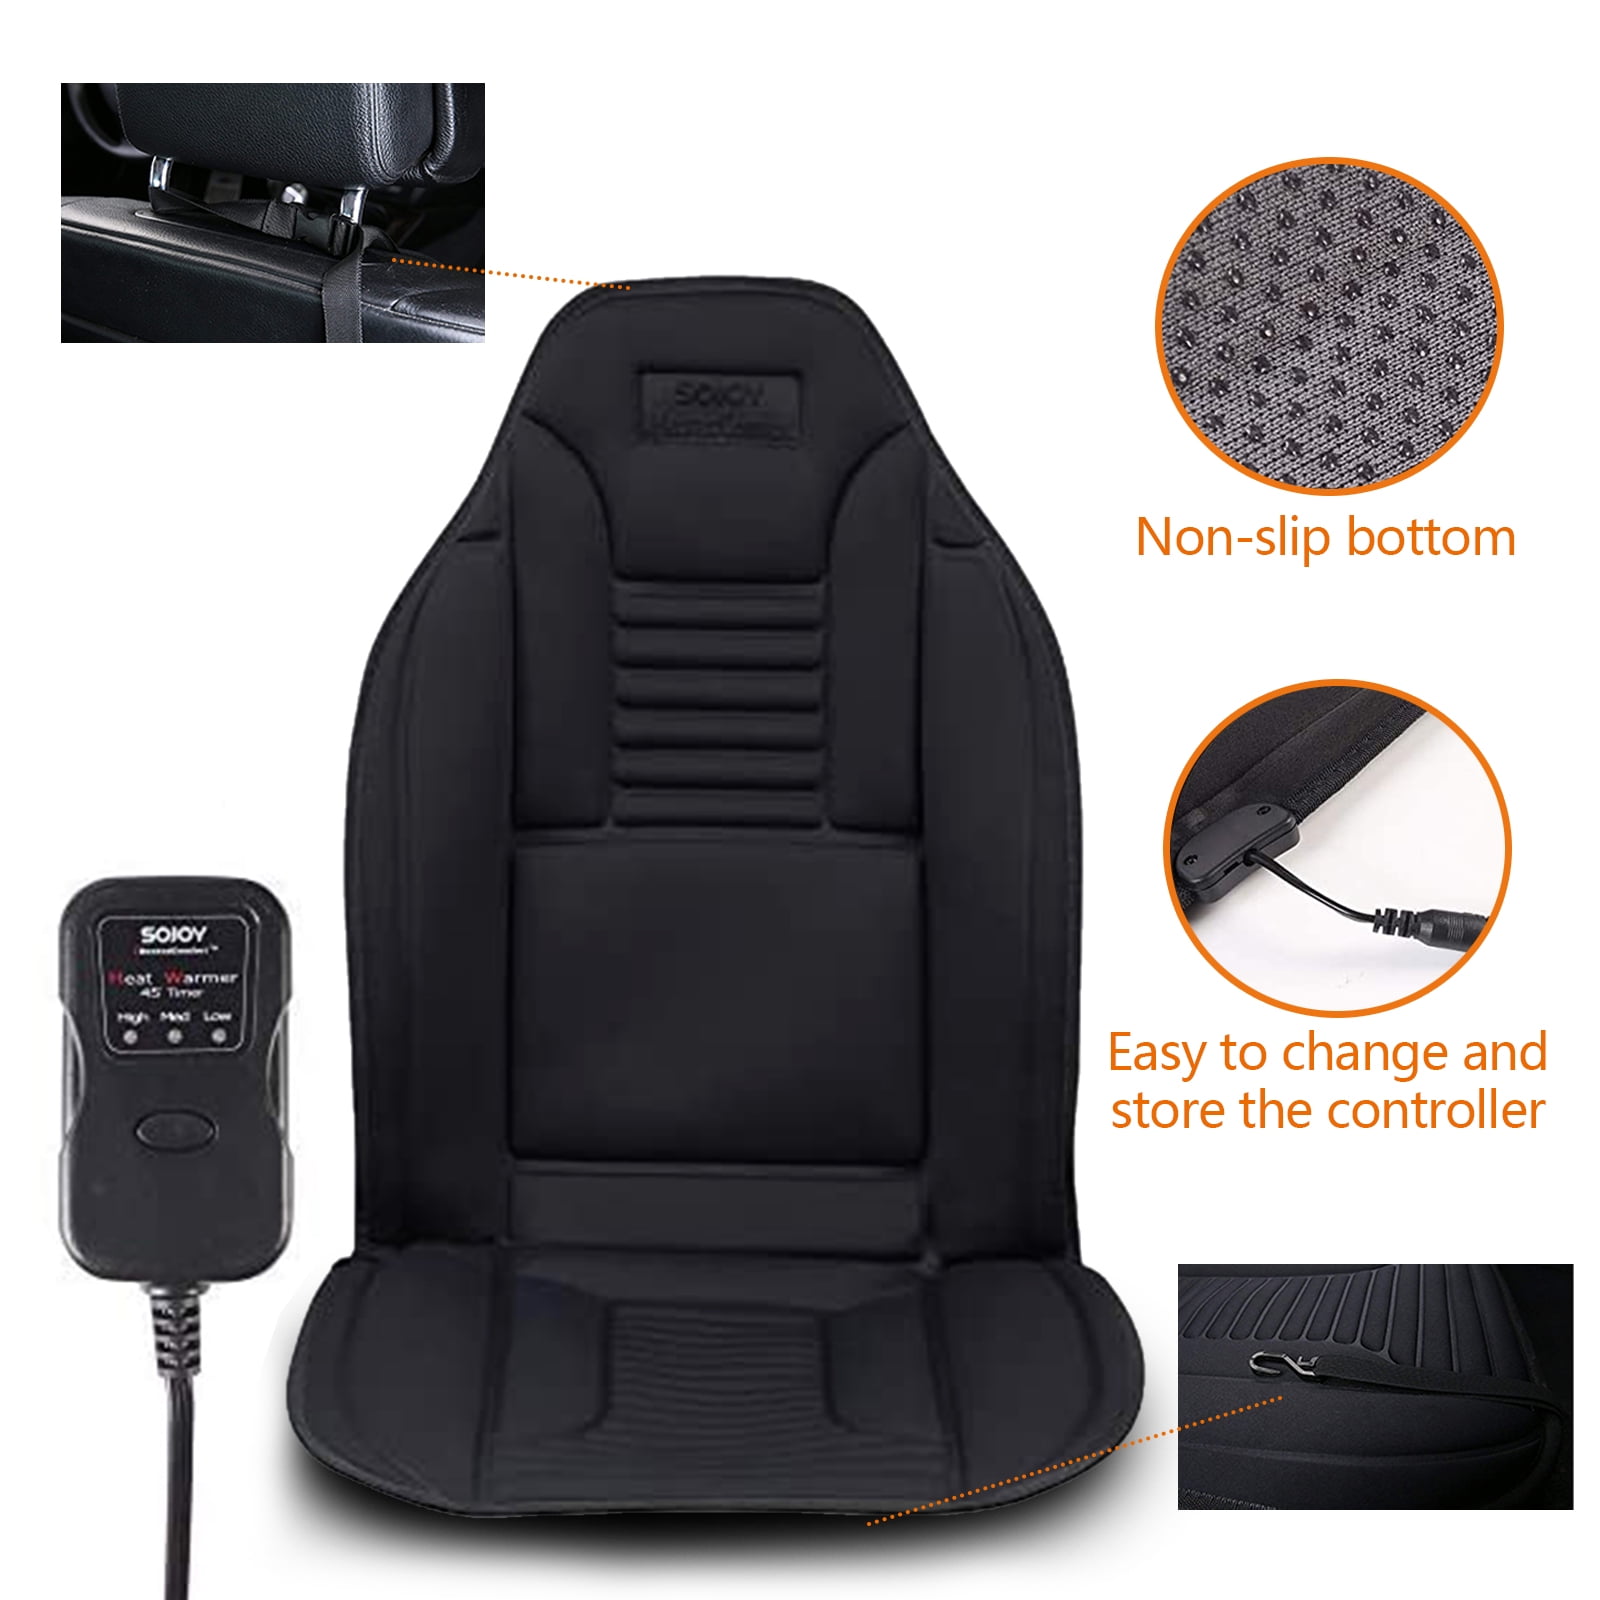 Sojoy Heated Car Seat Cushion Seat Warmer Seat Heater for Cold Winter